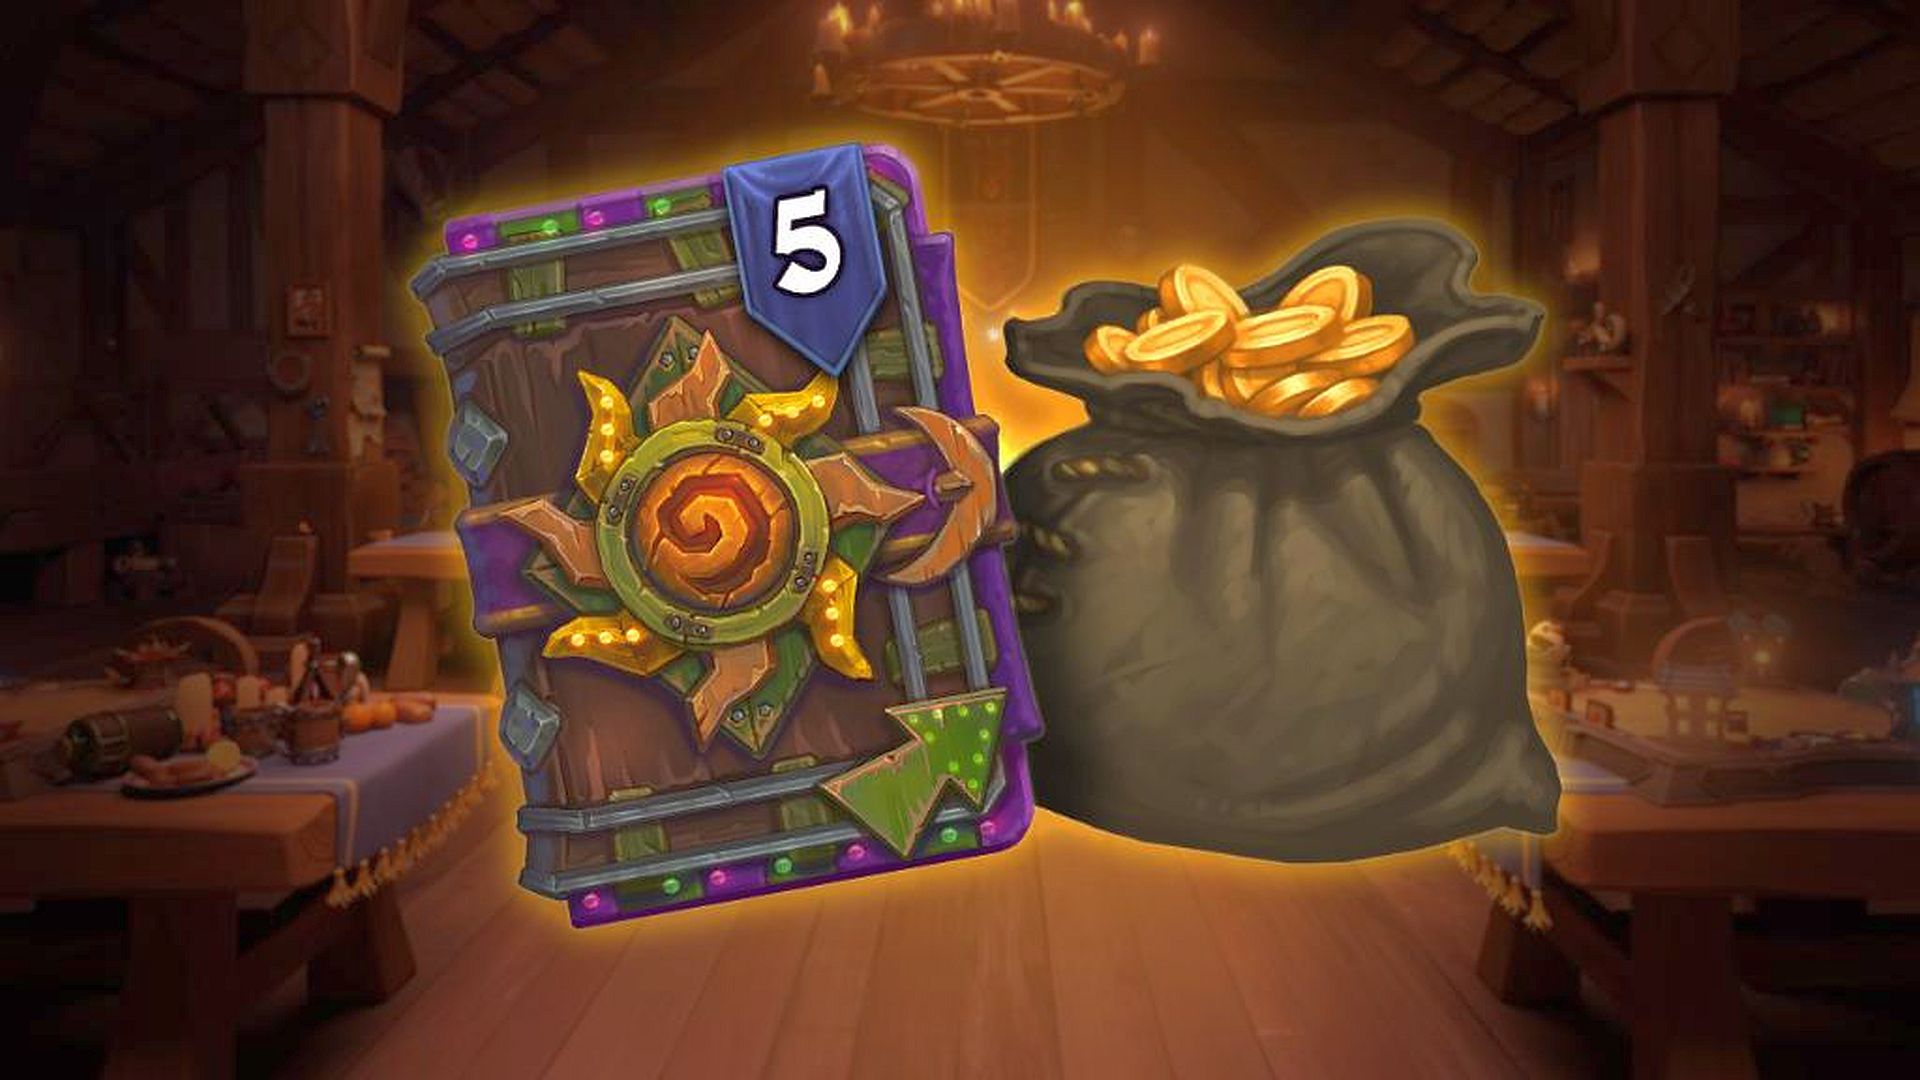 Blizzard’s giving away some free Hearthstone card packs and gold right now